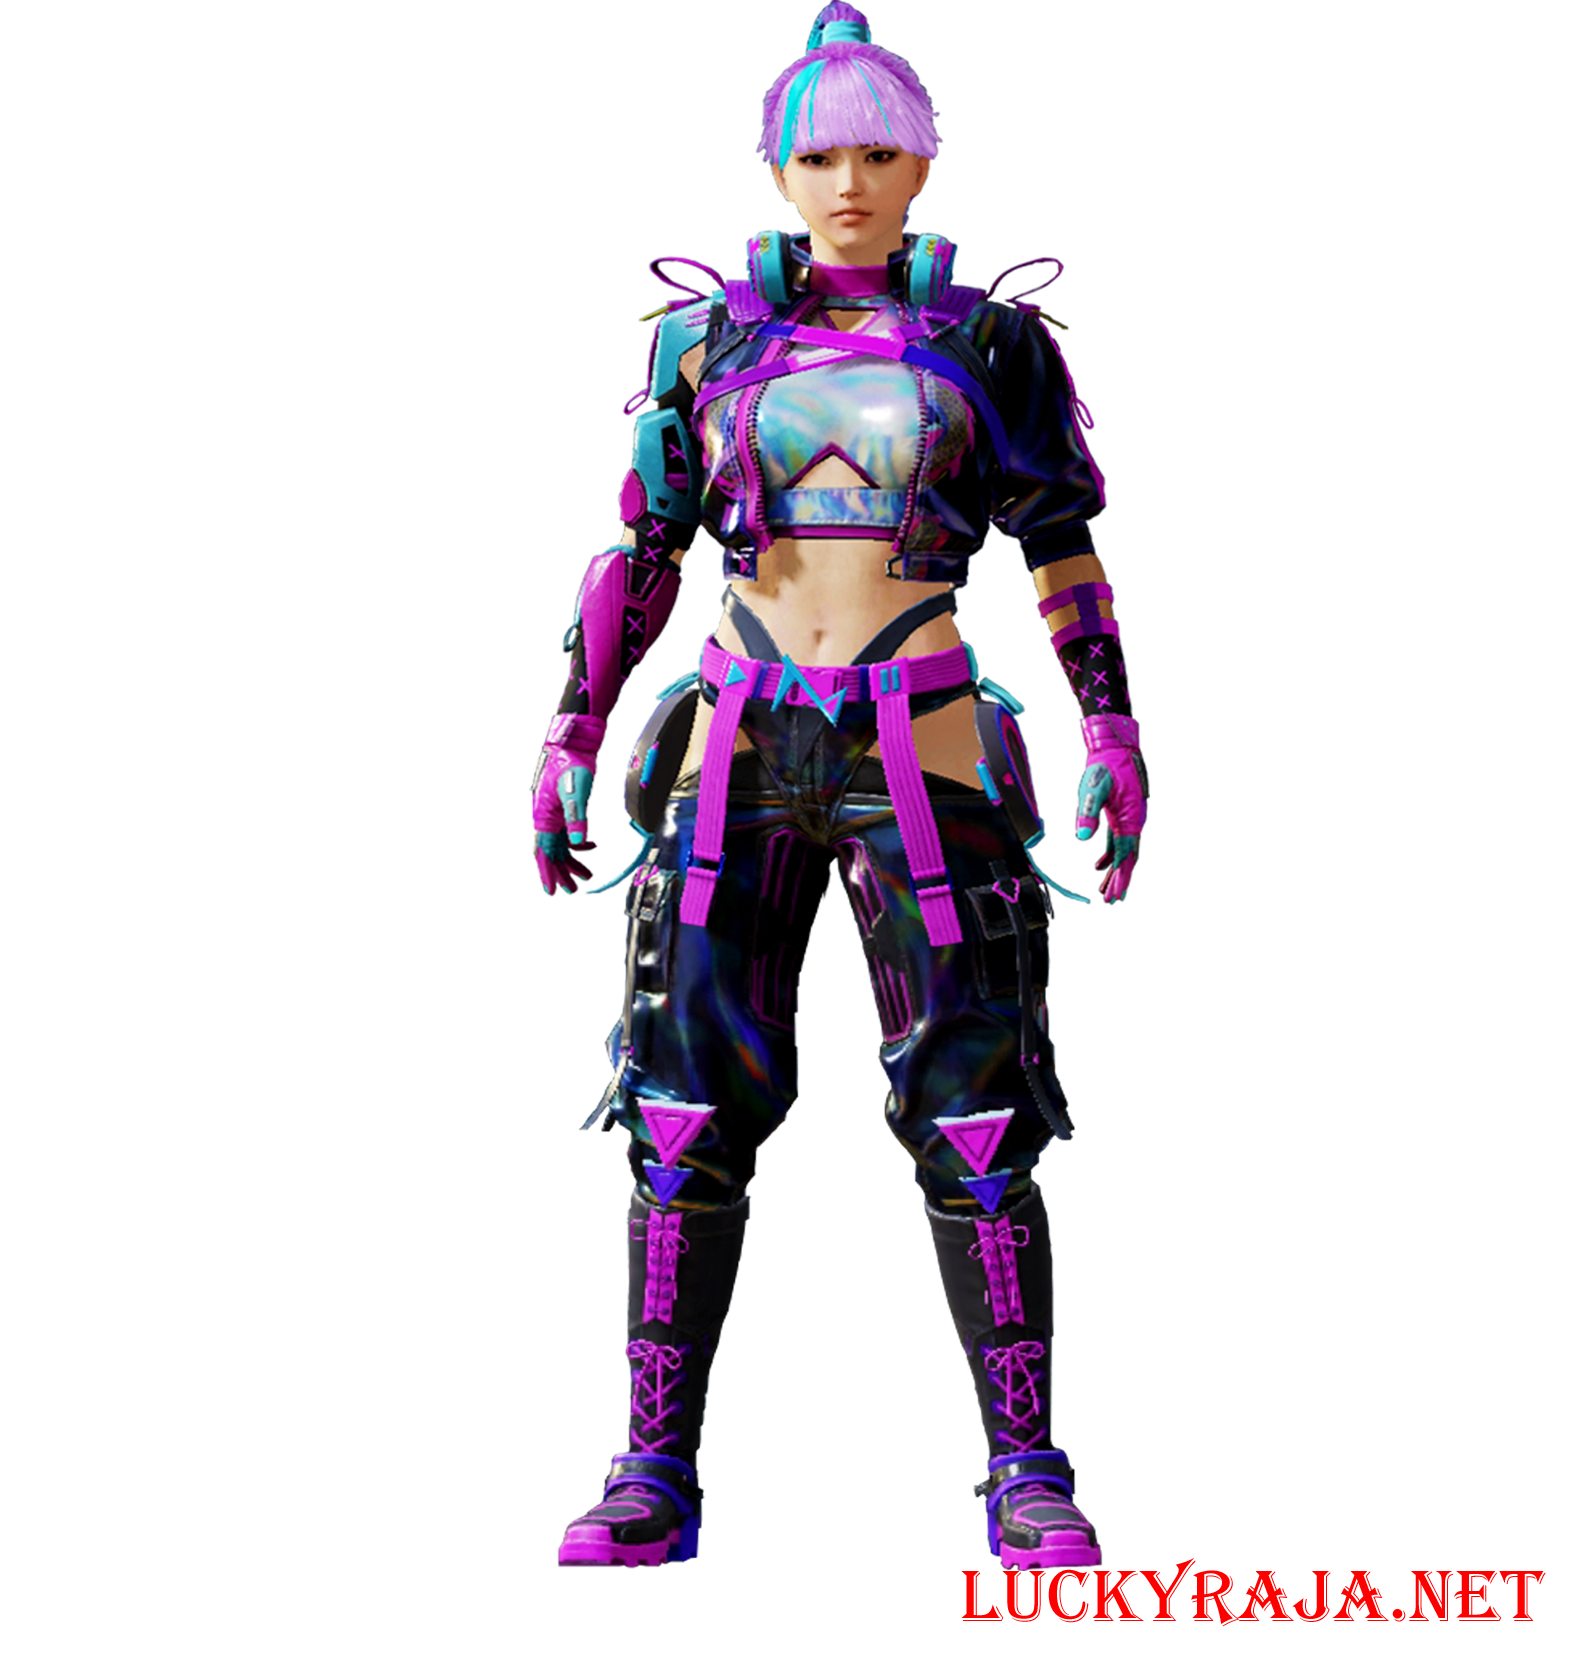 Cybernetic Trance ,Cybernetic Trance images,Cybernetic Trance pubg mobile,Cybernetic Trance outfit,pubg mobile outfits,animation,cartoon images